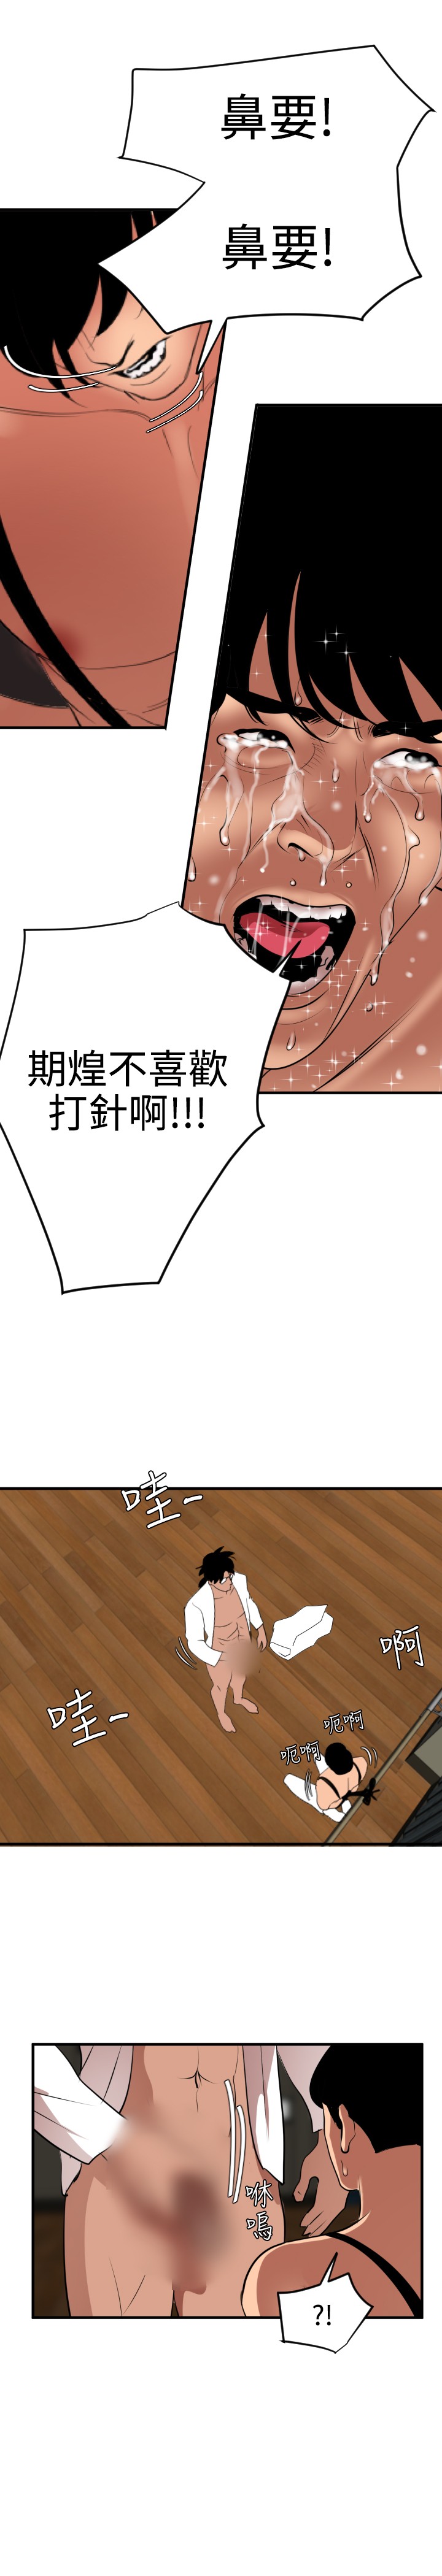 Desire King 欲求王 Ch.41-42 [Chinese] page 30 full